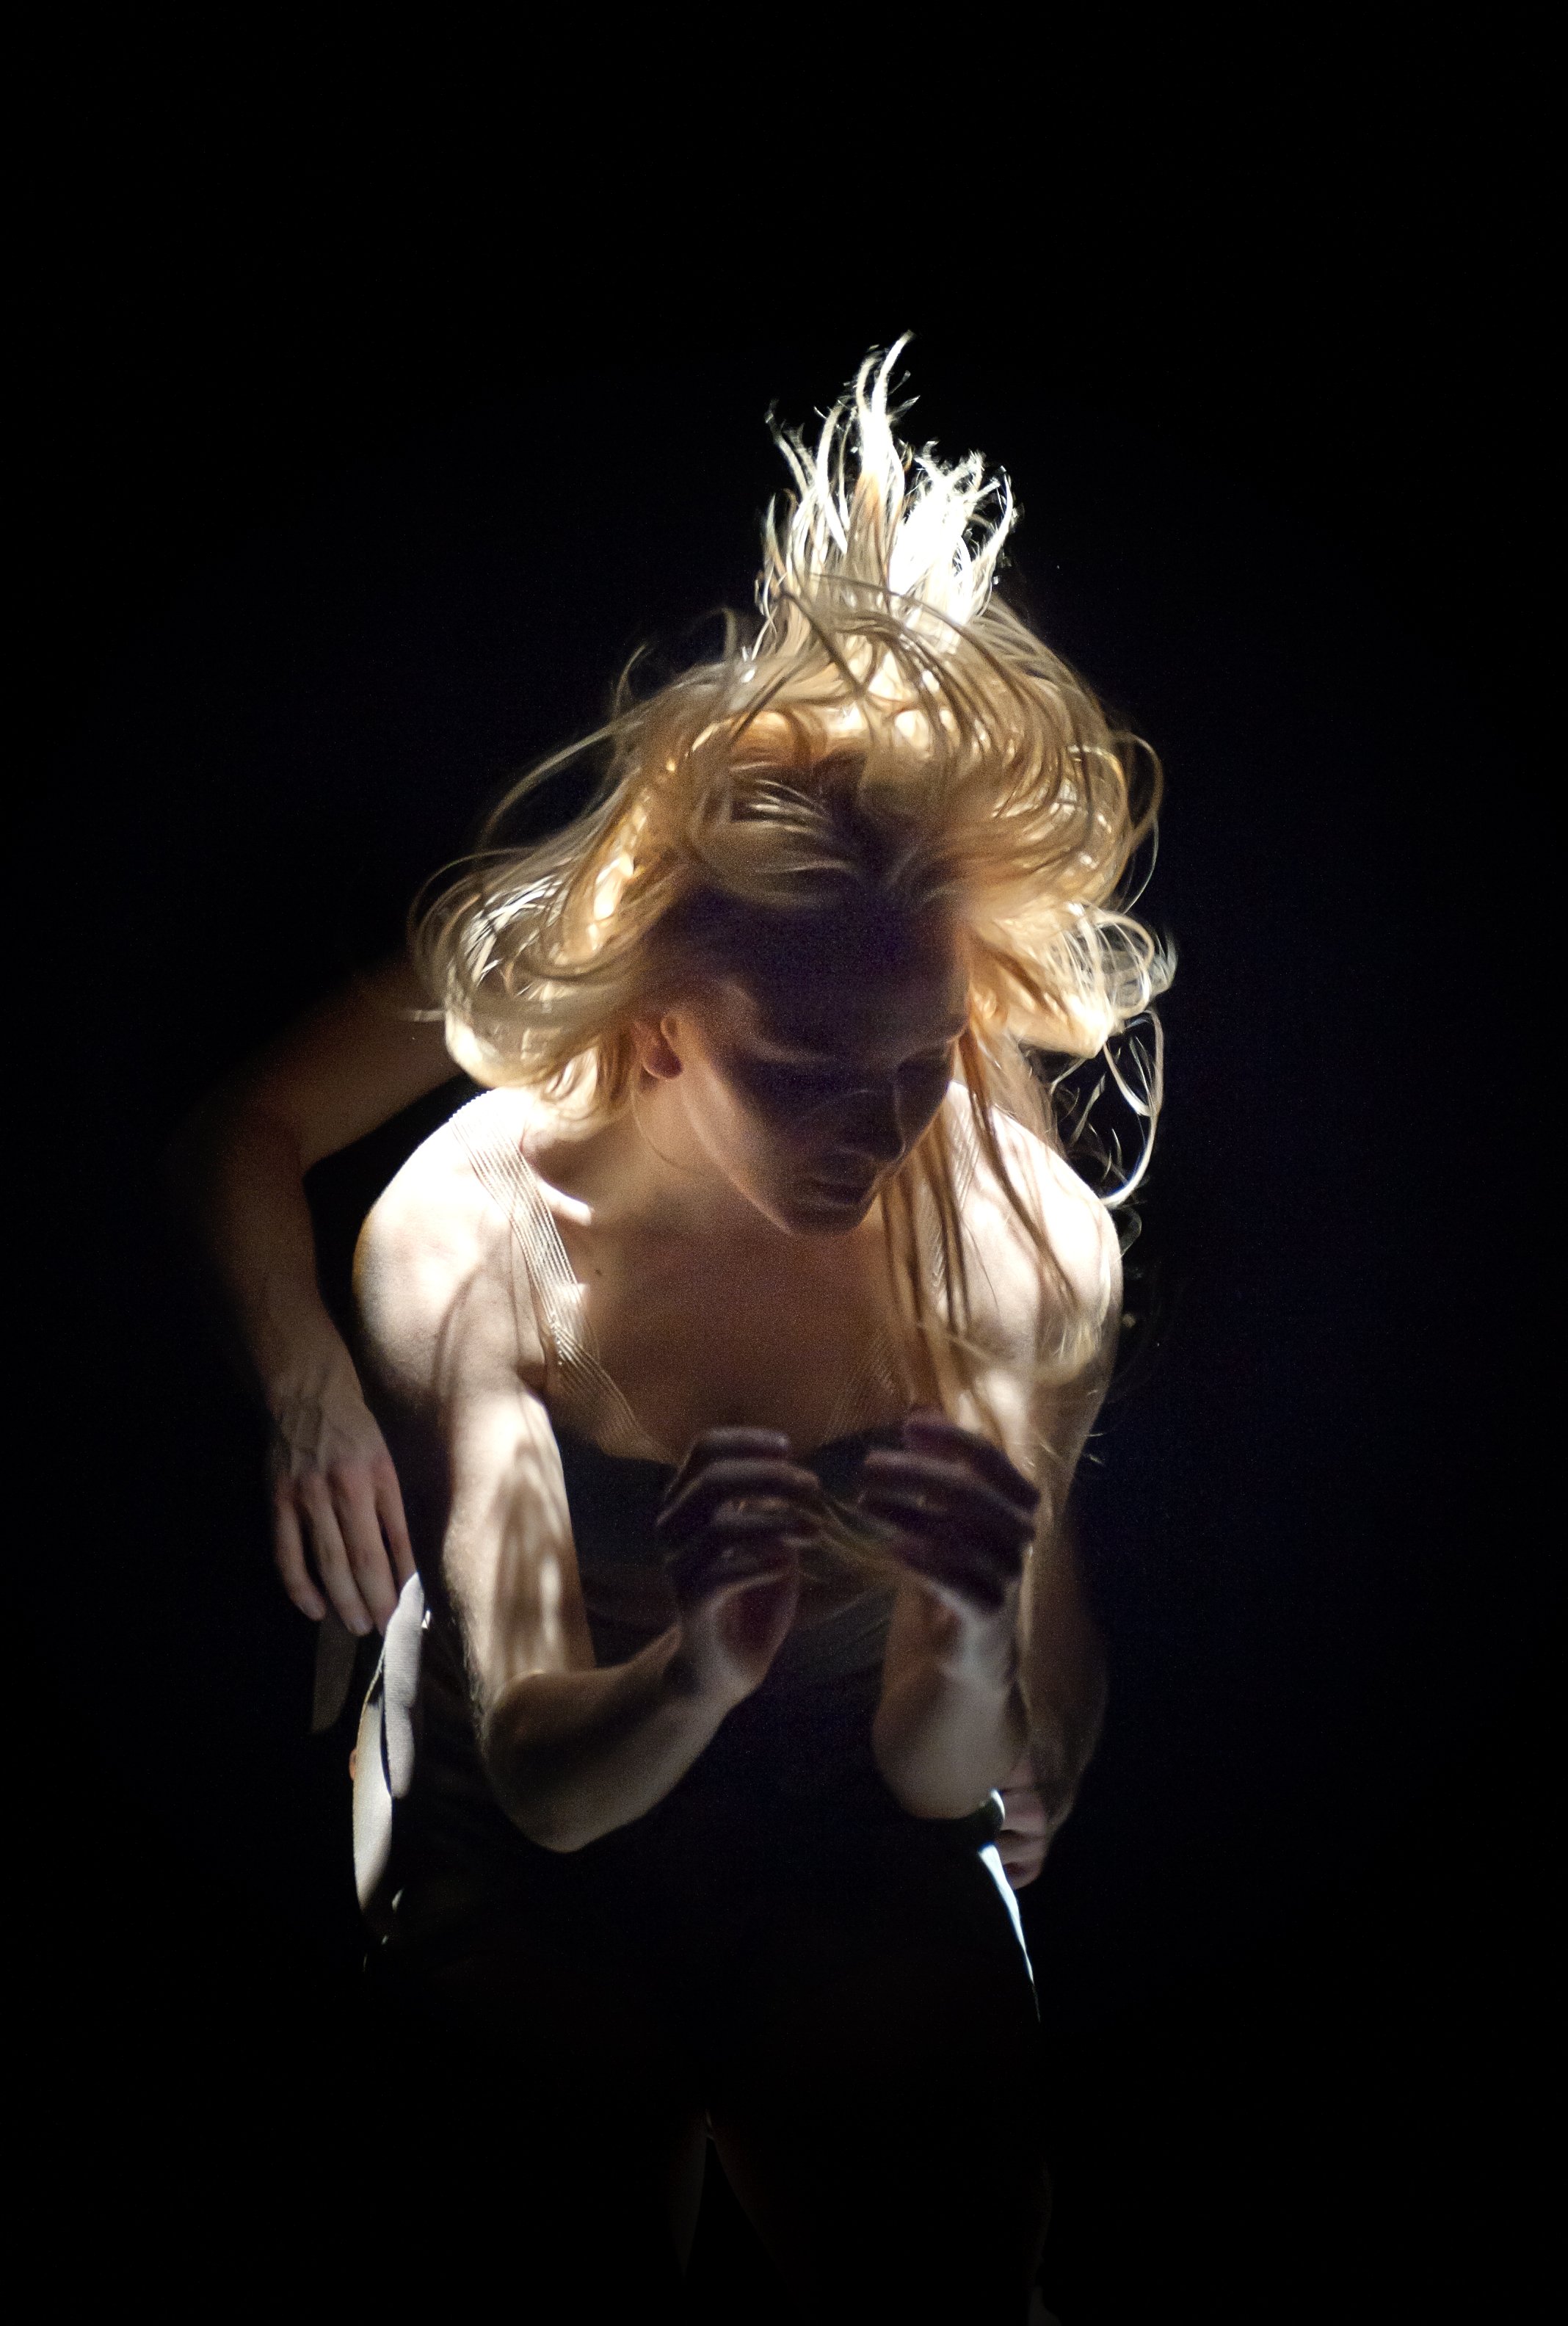 A close up of a dancer with their hair flying around their face.